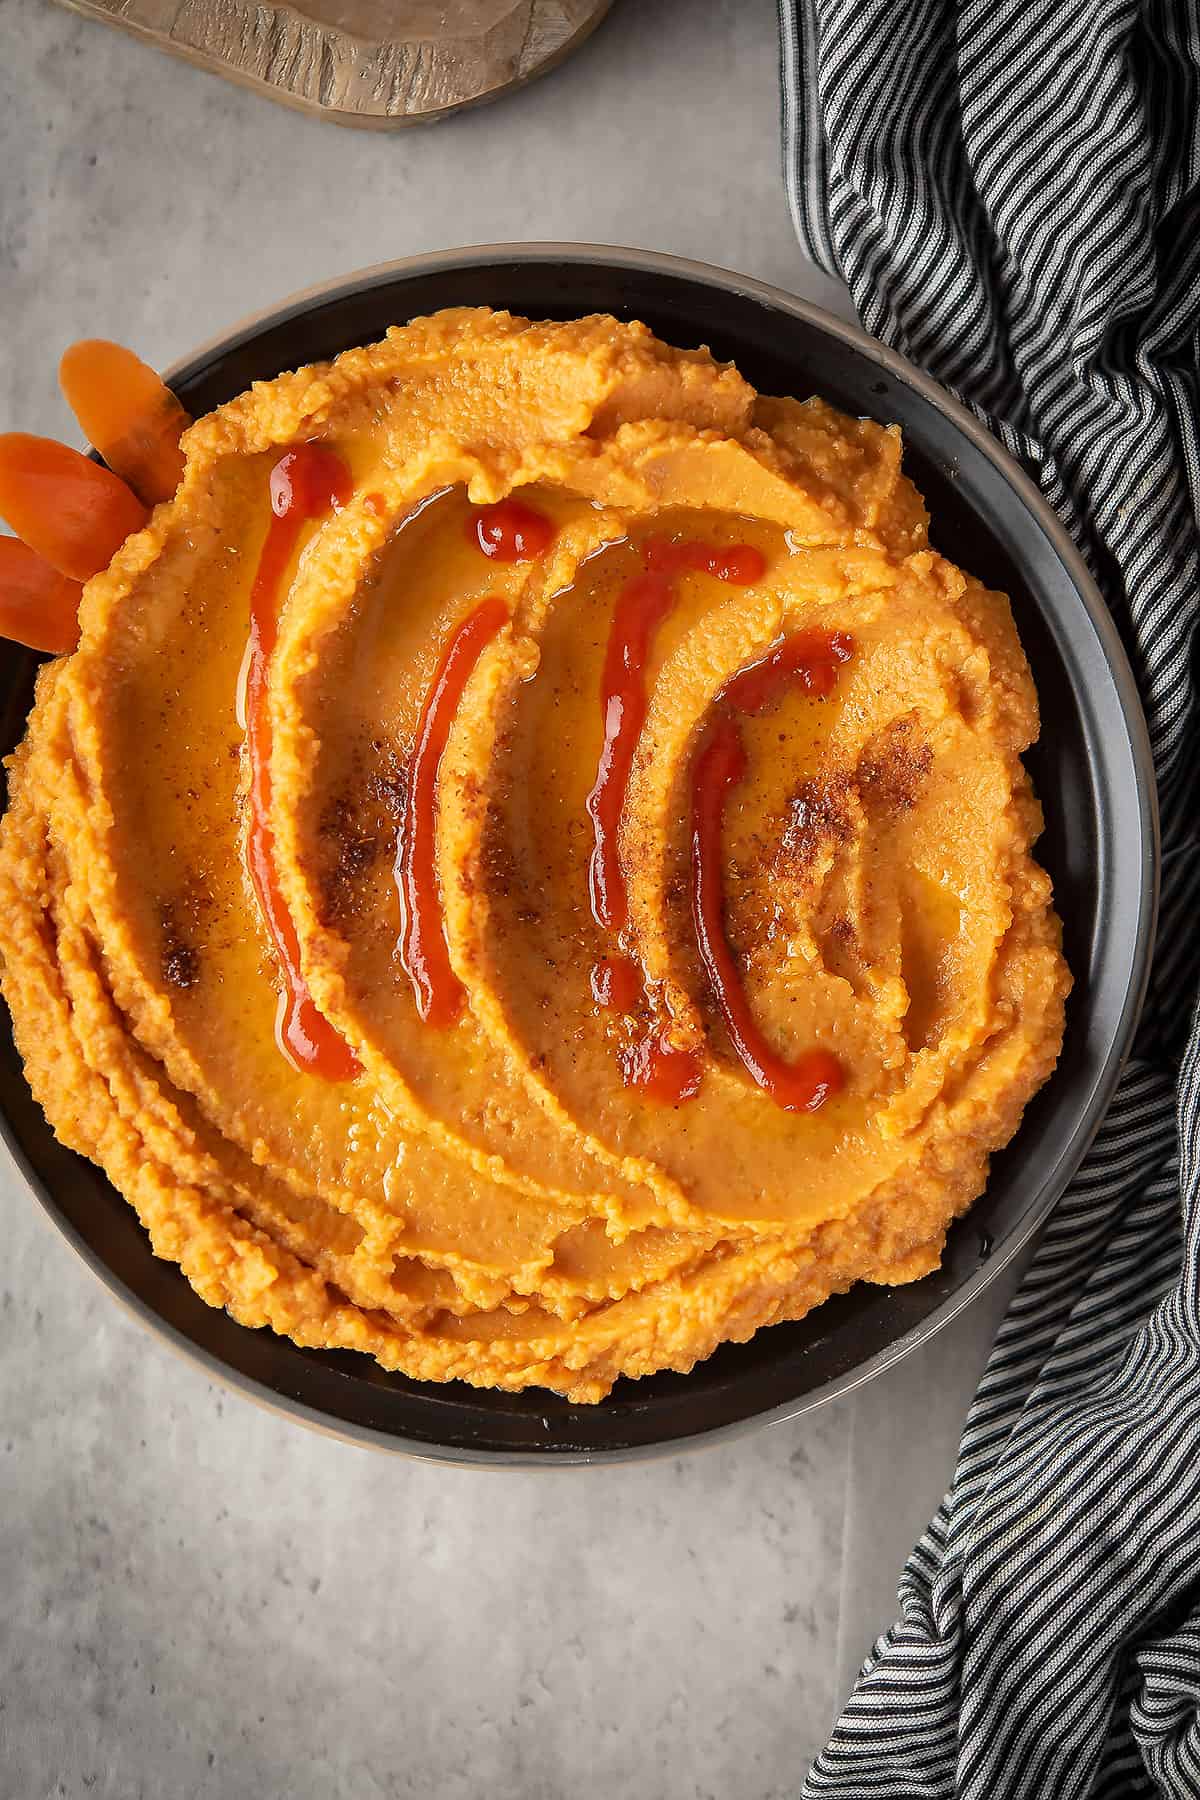 This creamy, sweet and spicy  carrot Sriracha hummus in the black plate